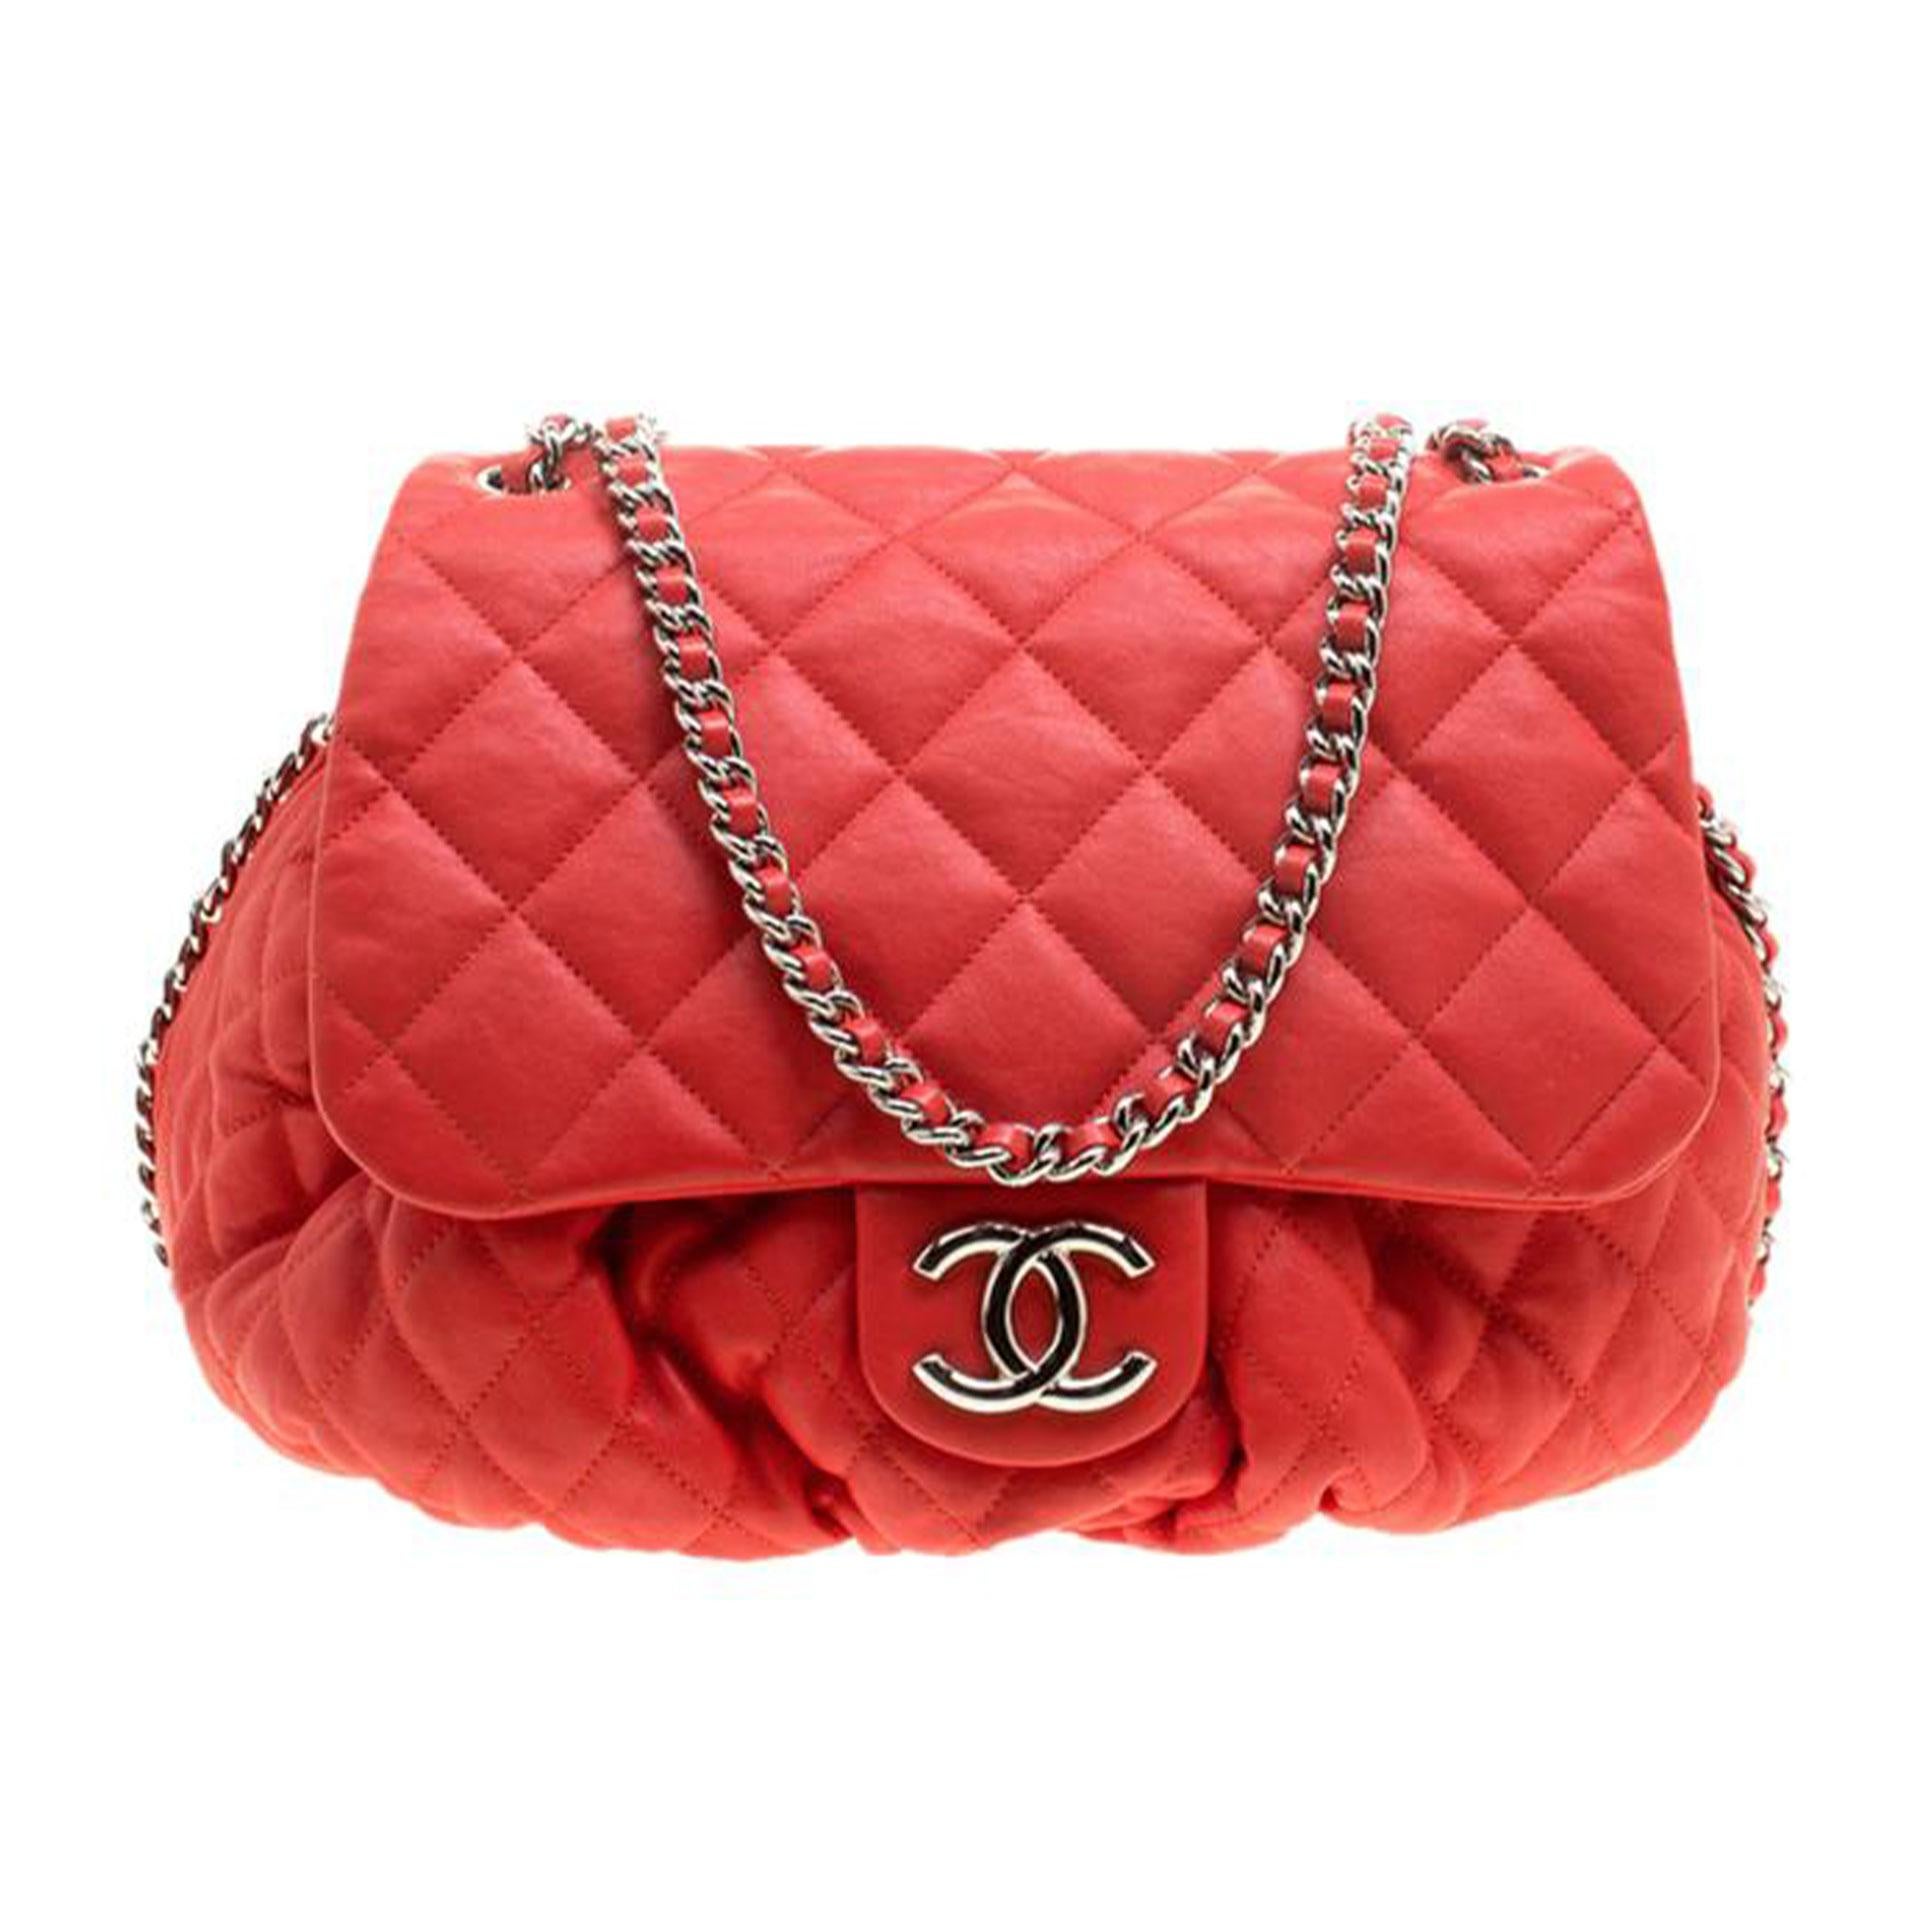 Chanel Large Chain Around Limited Edition Pristine Red Calfskin Leather Flap Bag For Sale 6